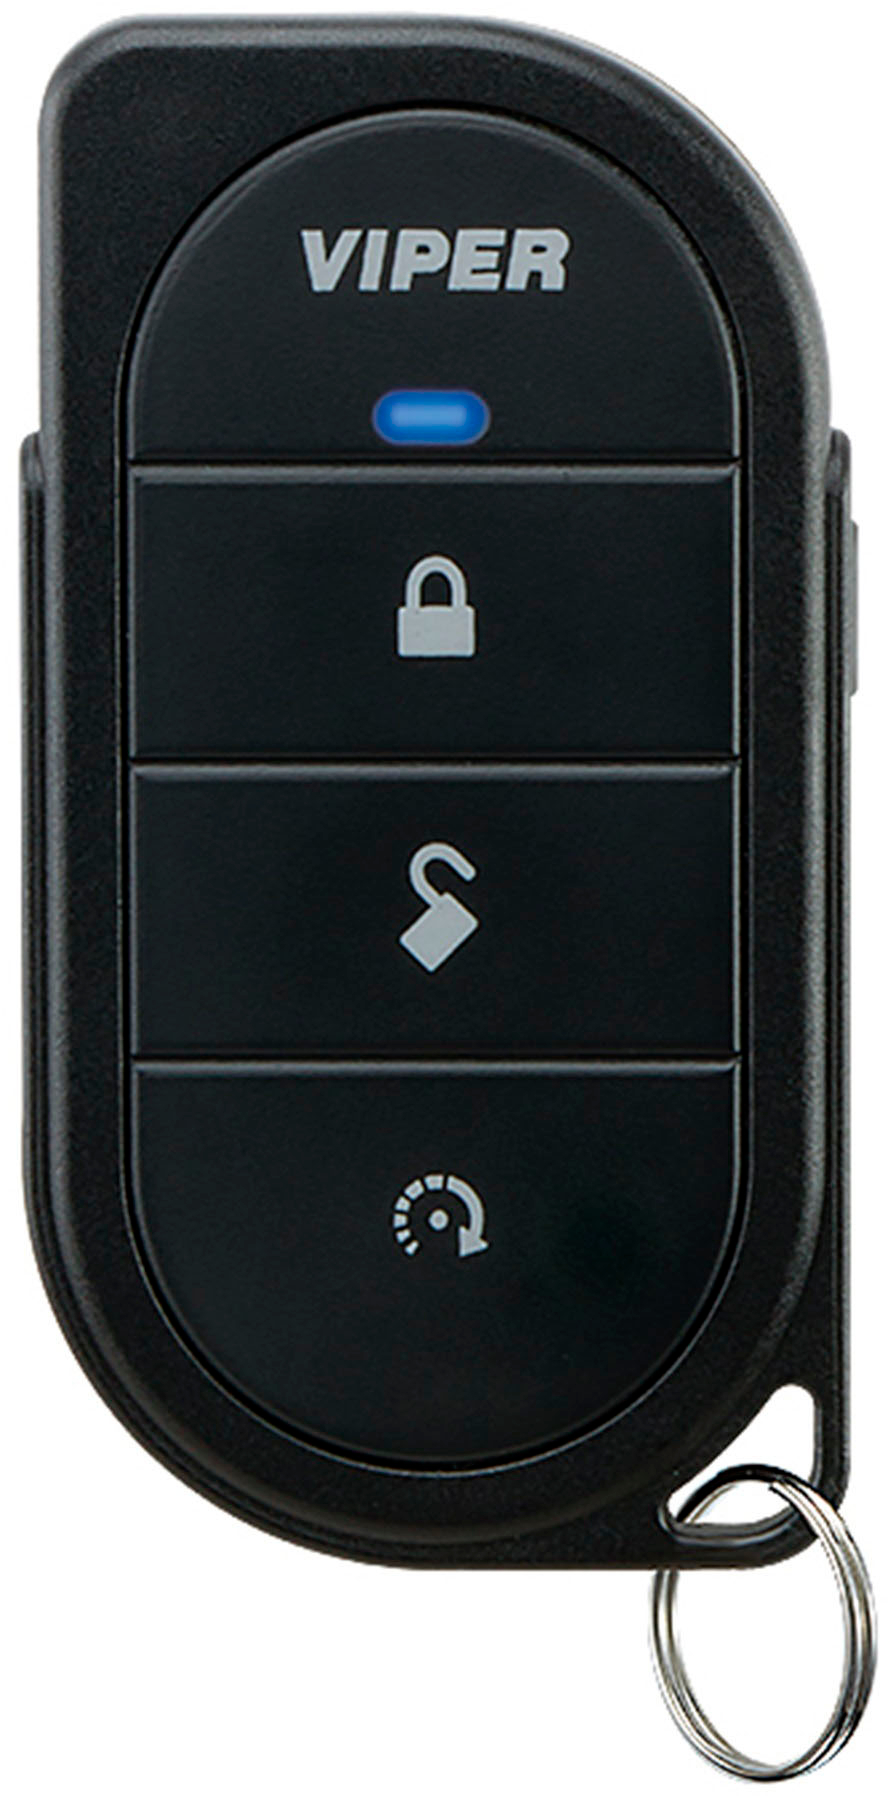 Angle View: Replacement 1-way Remote for Compustar Remote Start and Security Systems